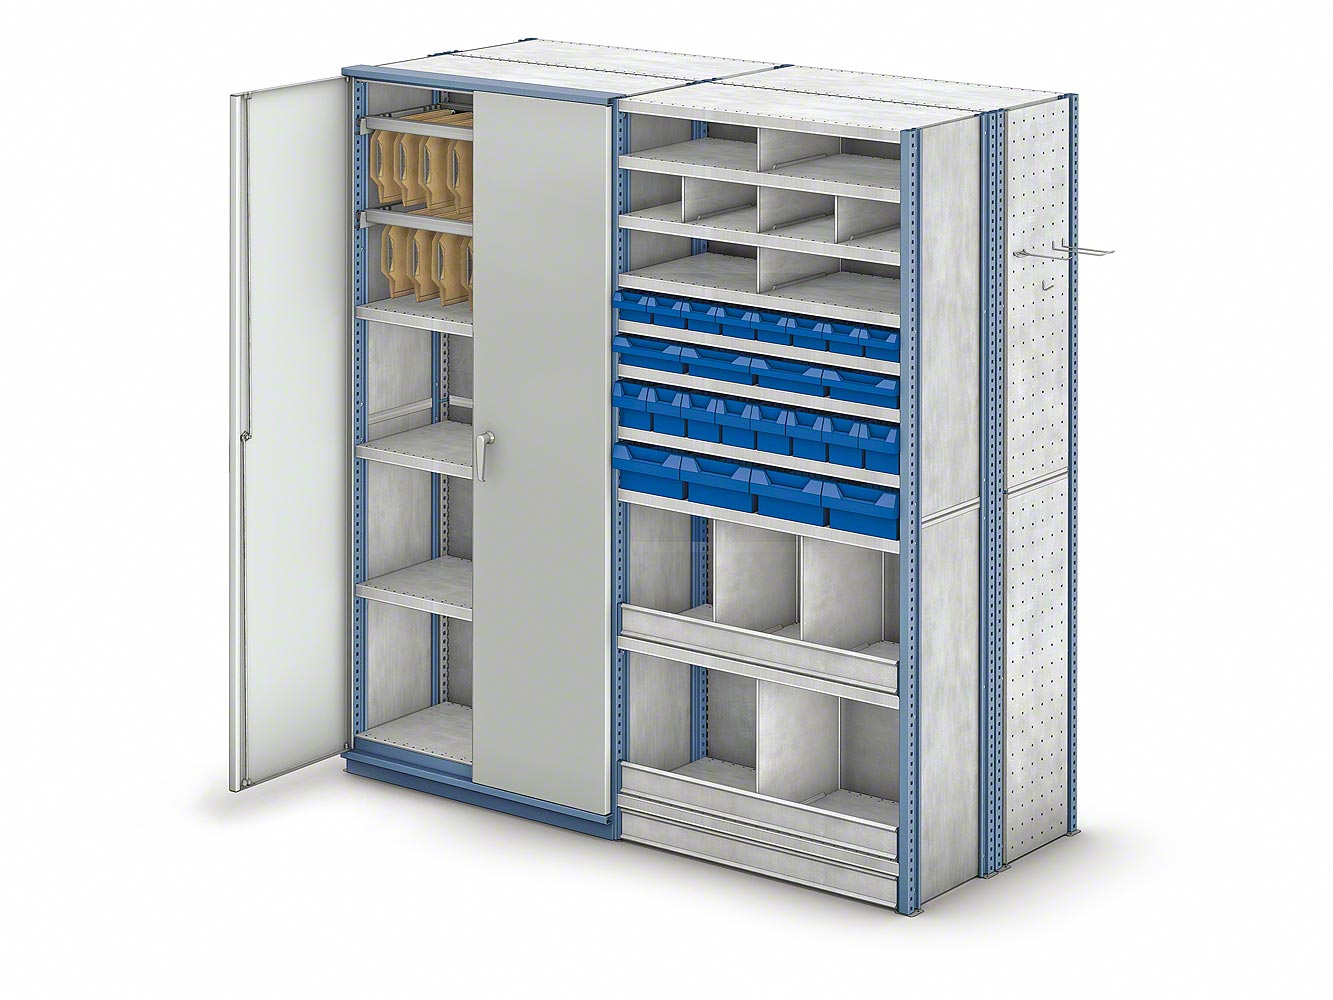 Shelving M3 Picking Mecalux Com, Mecalux Metal Point Shelving Systems